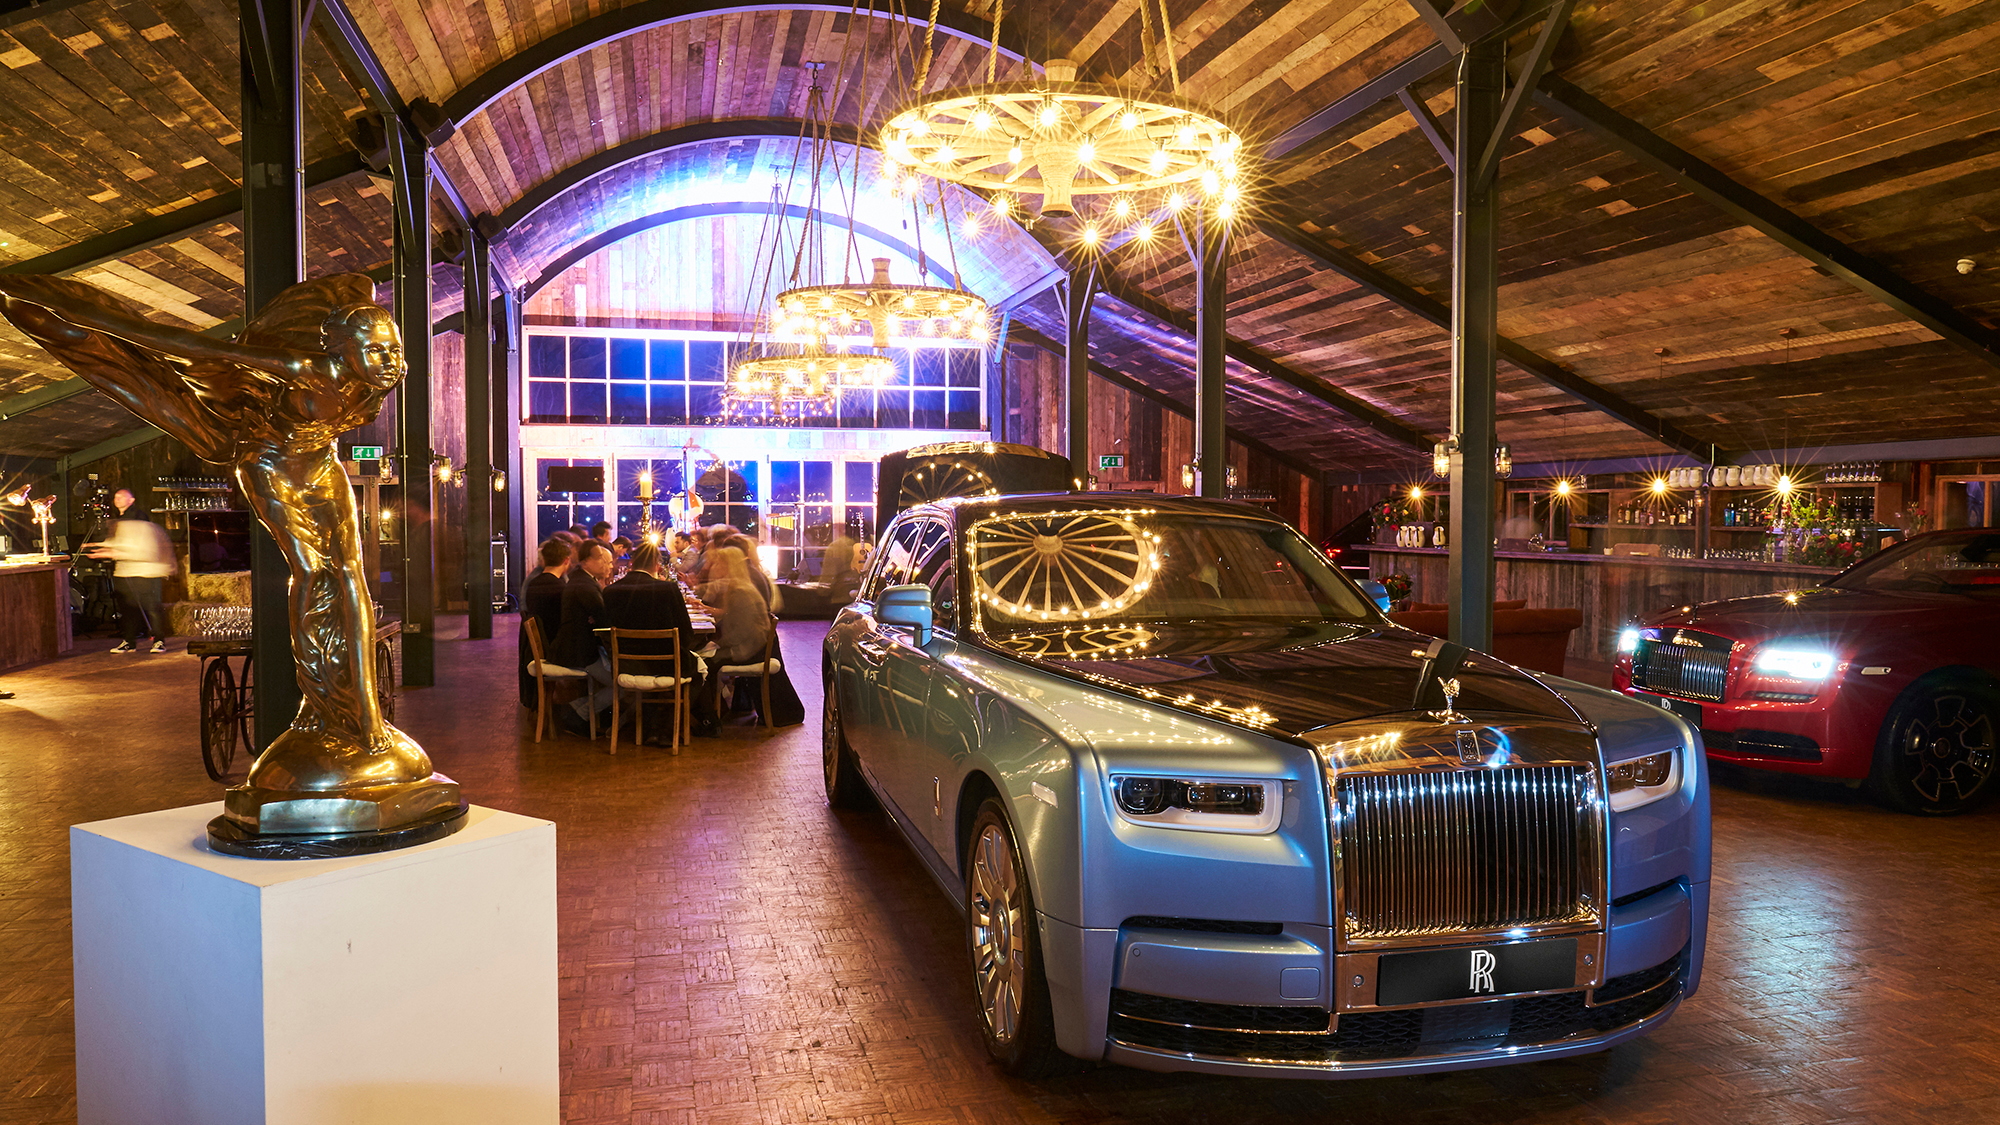 Rolls-Royce creates a Cars and Cognac event